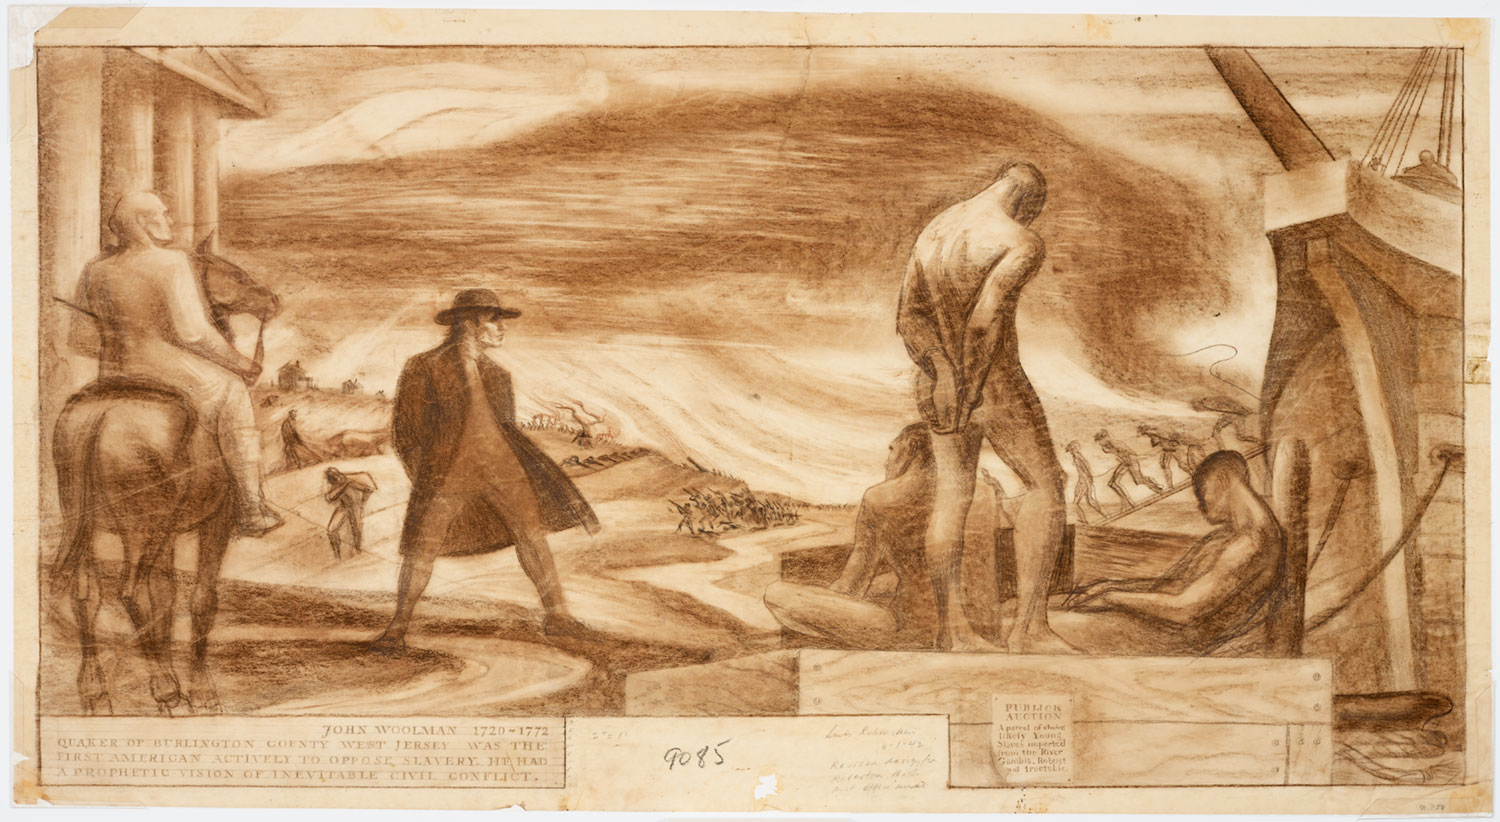 Mural study of a slave auction